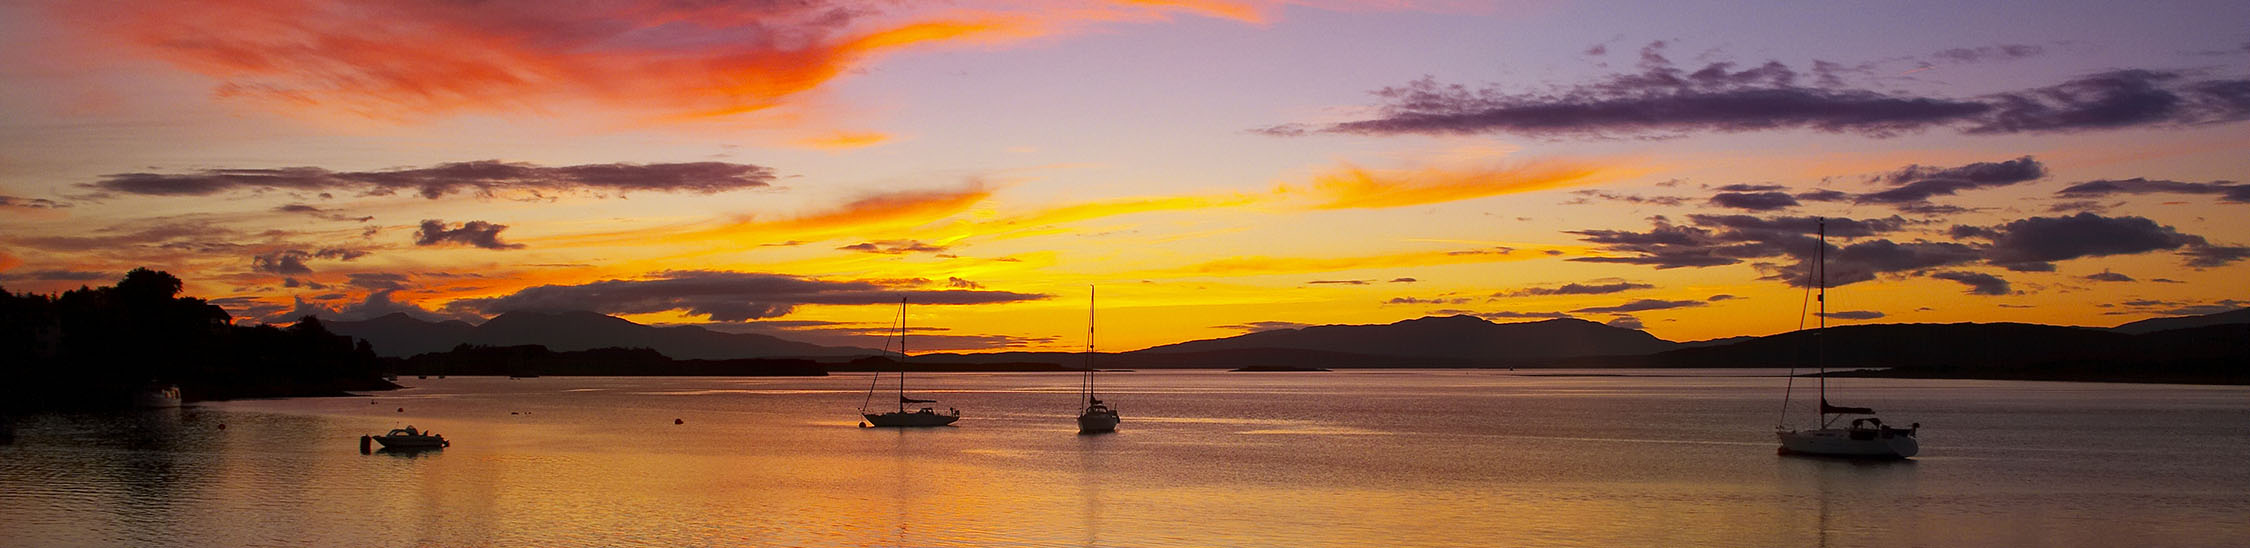 Picture-perfect scene: boats gently bobbing on the water, silhouetted against a fiery sunset.